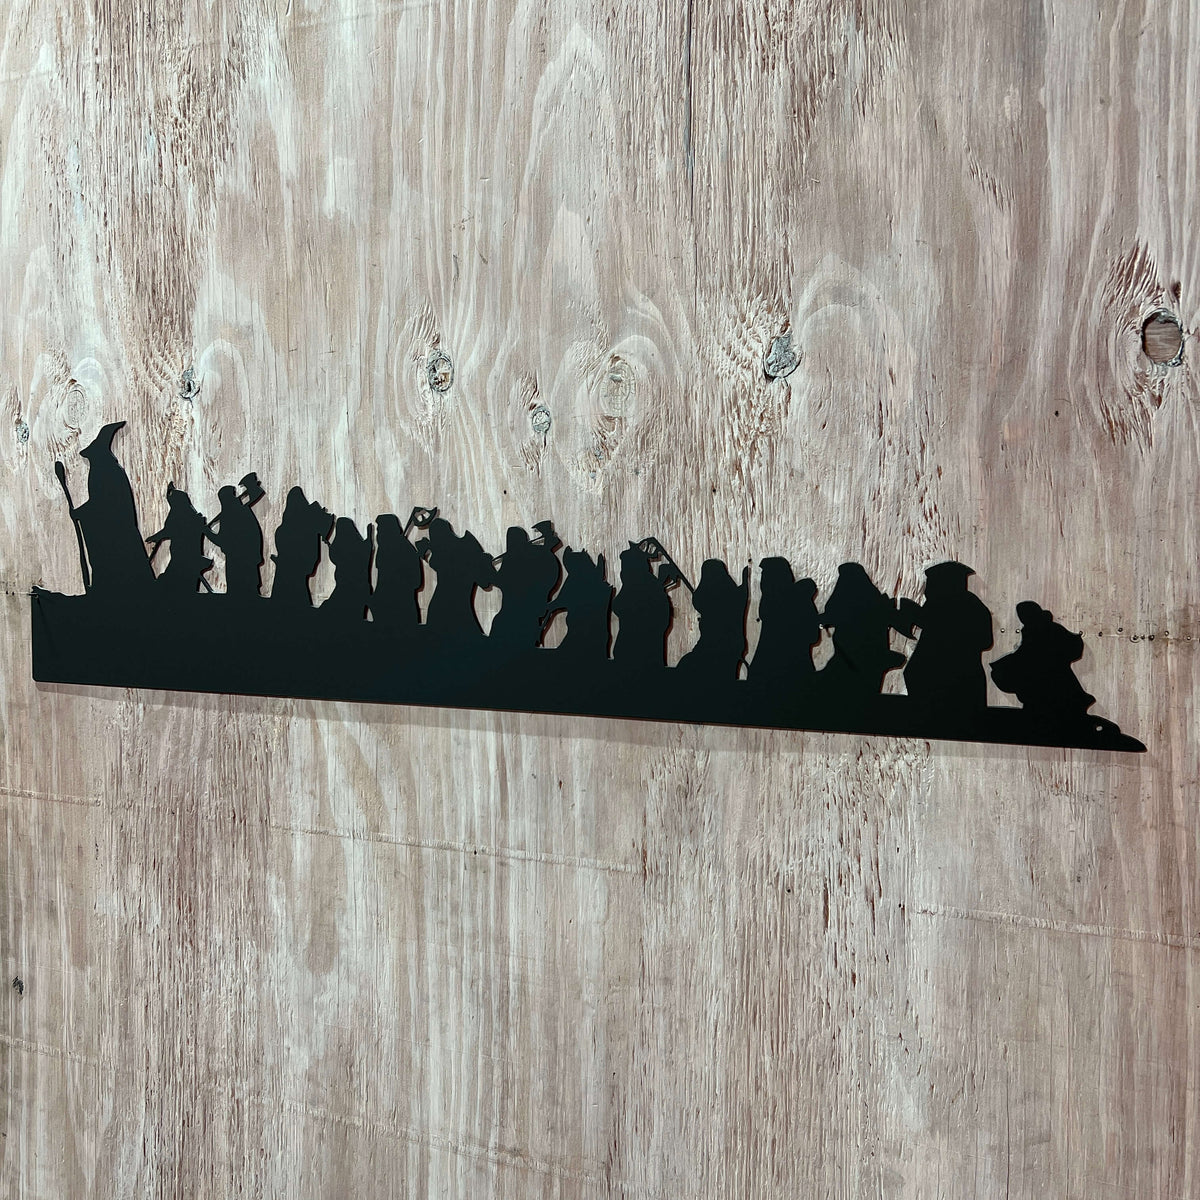 Lord of the Rings Hobbit Silhouette | Metal Wall Art | 40" | #LotR